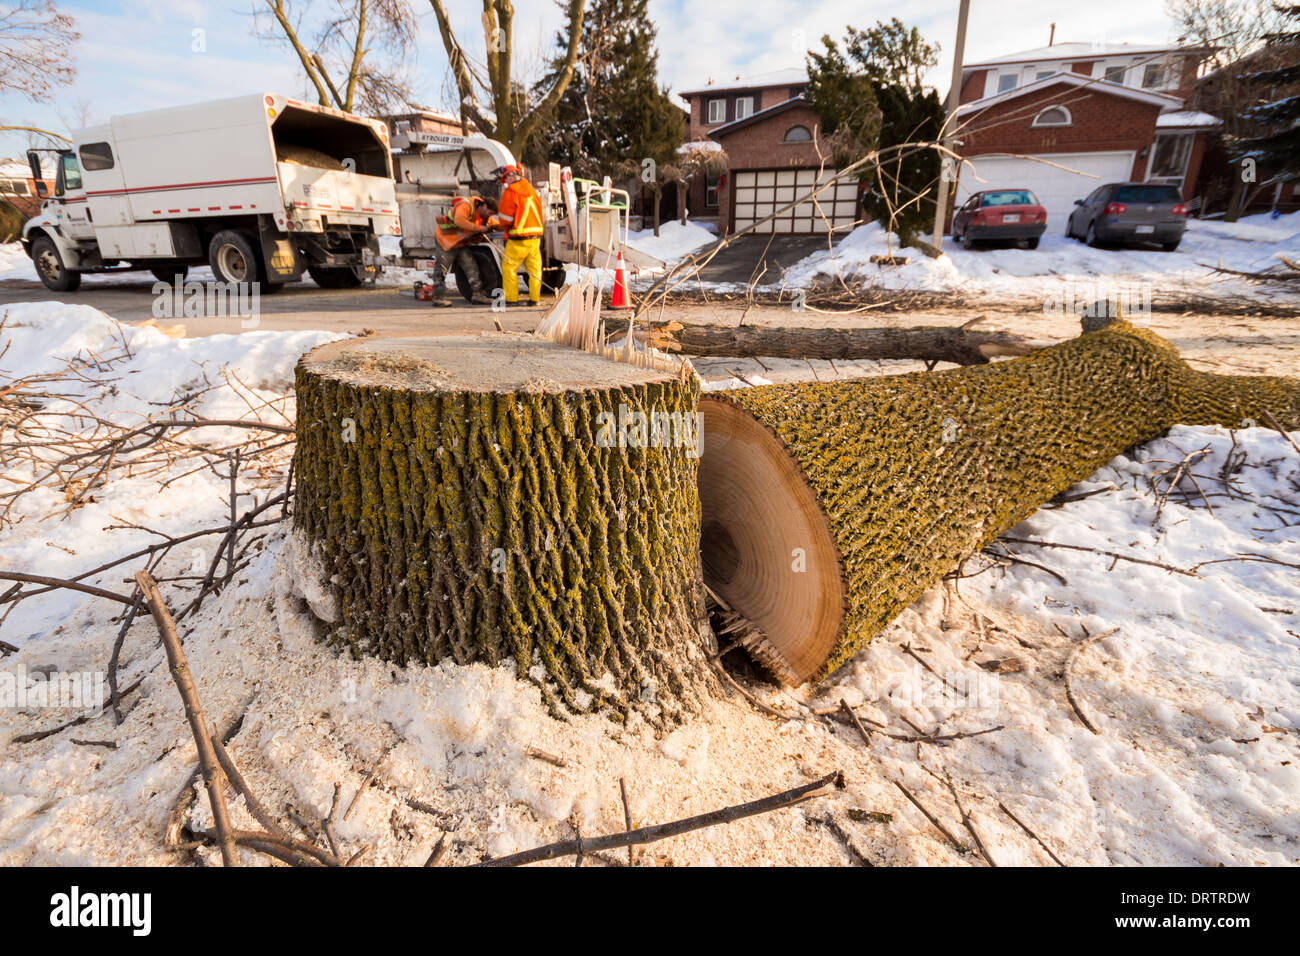 Forestry crews and residents chop down damaged ash trees using chainsaws after a severe ice storm leaving only stumps and debris Stock Photo